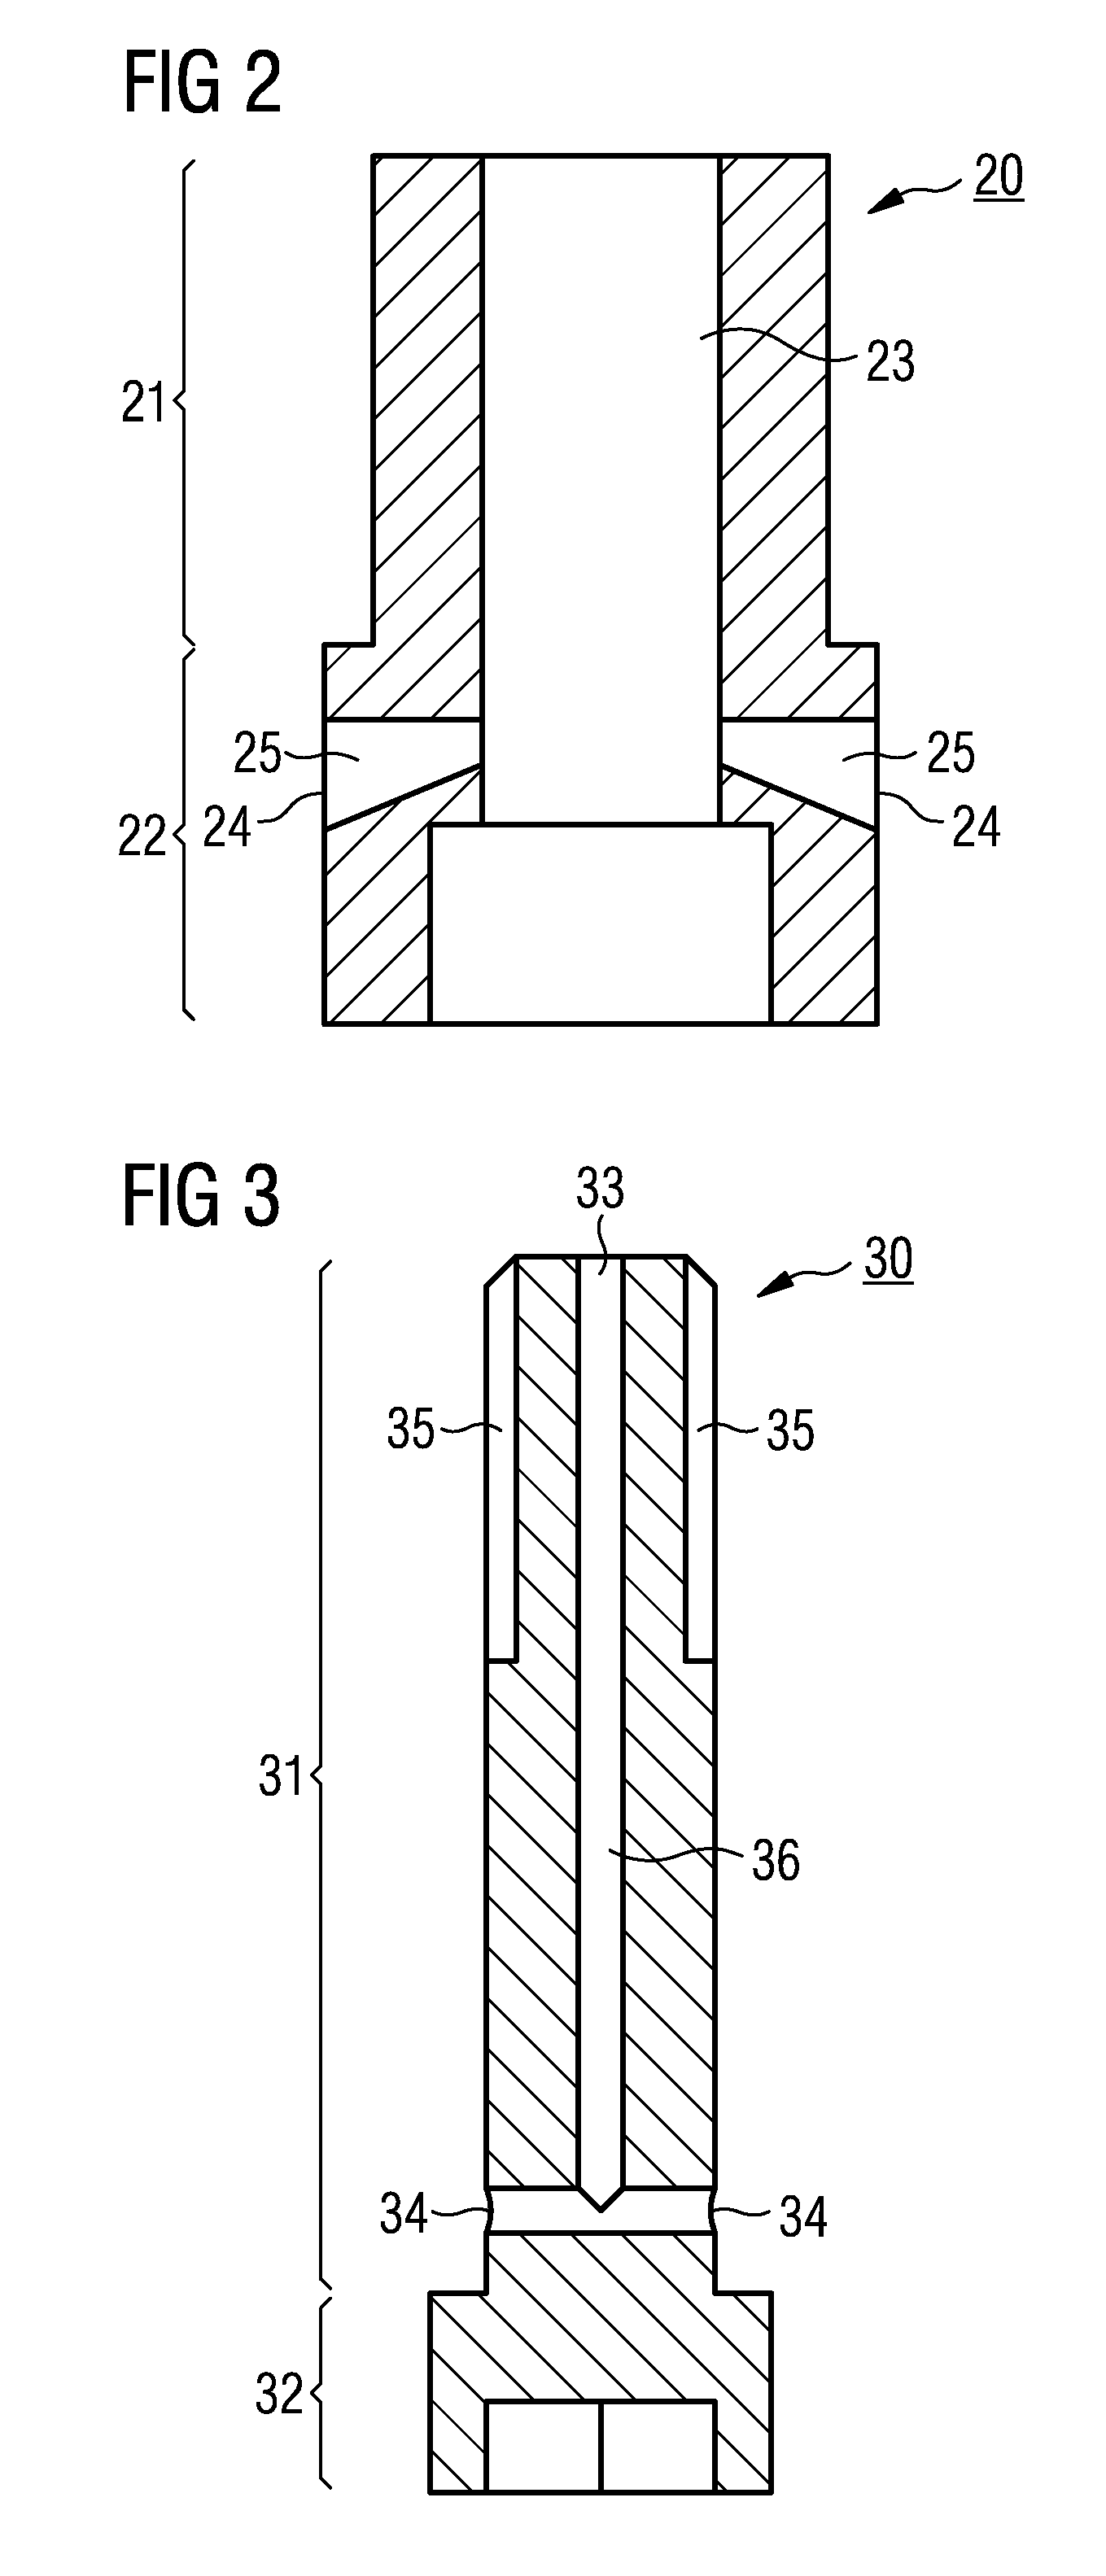 Through coolant adaptor for use on hollow spindle machine tools